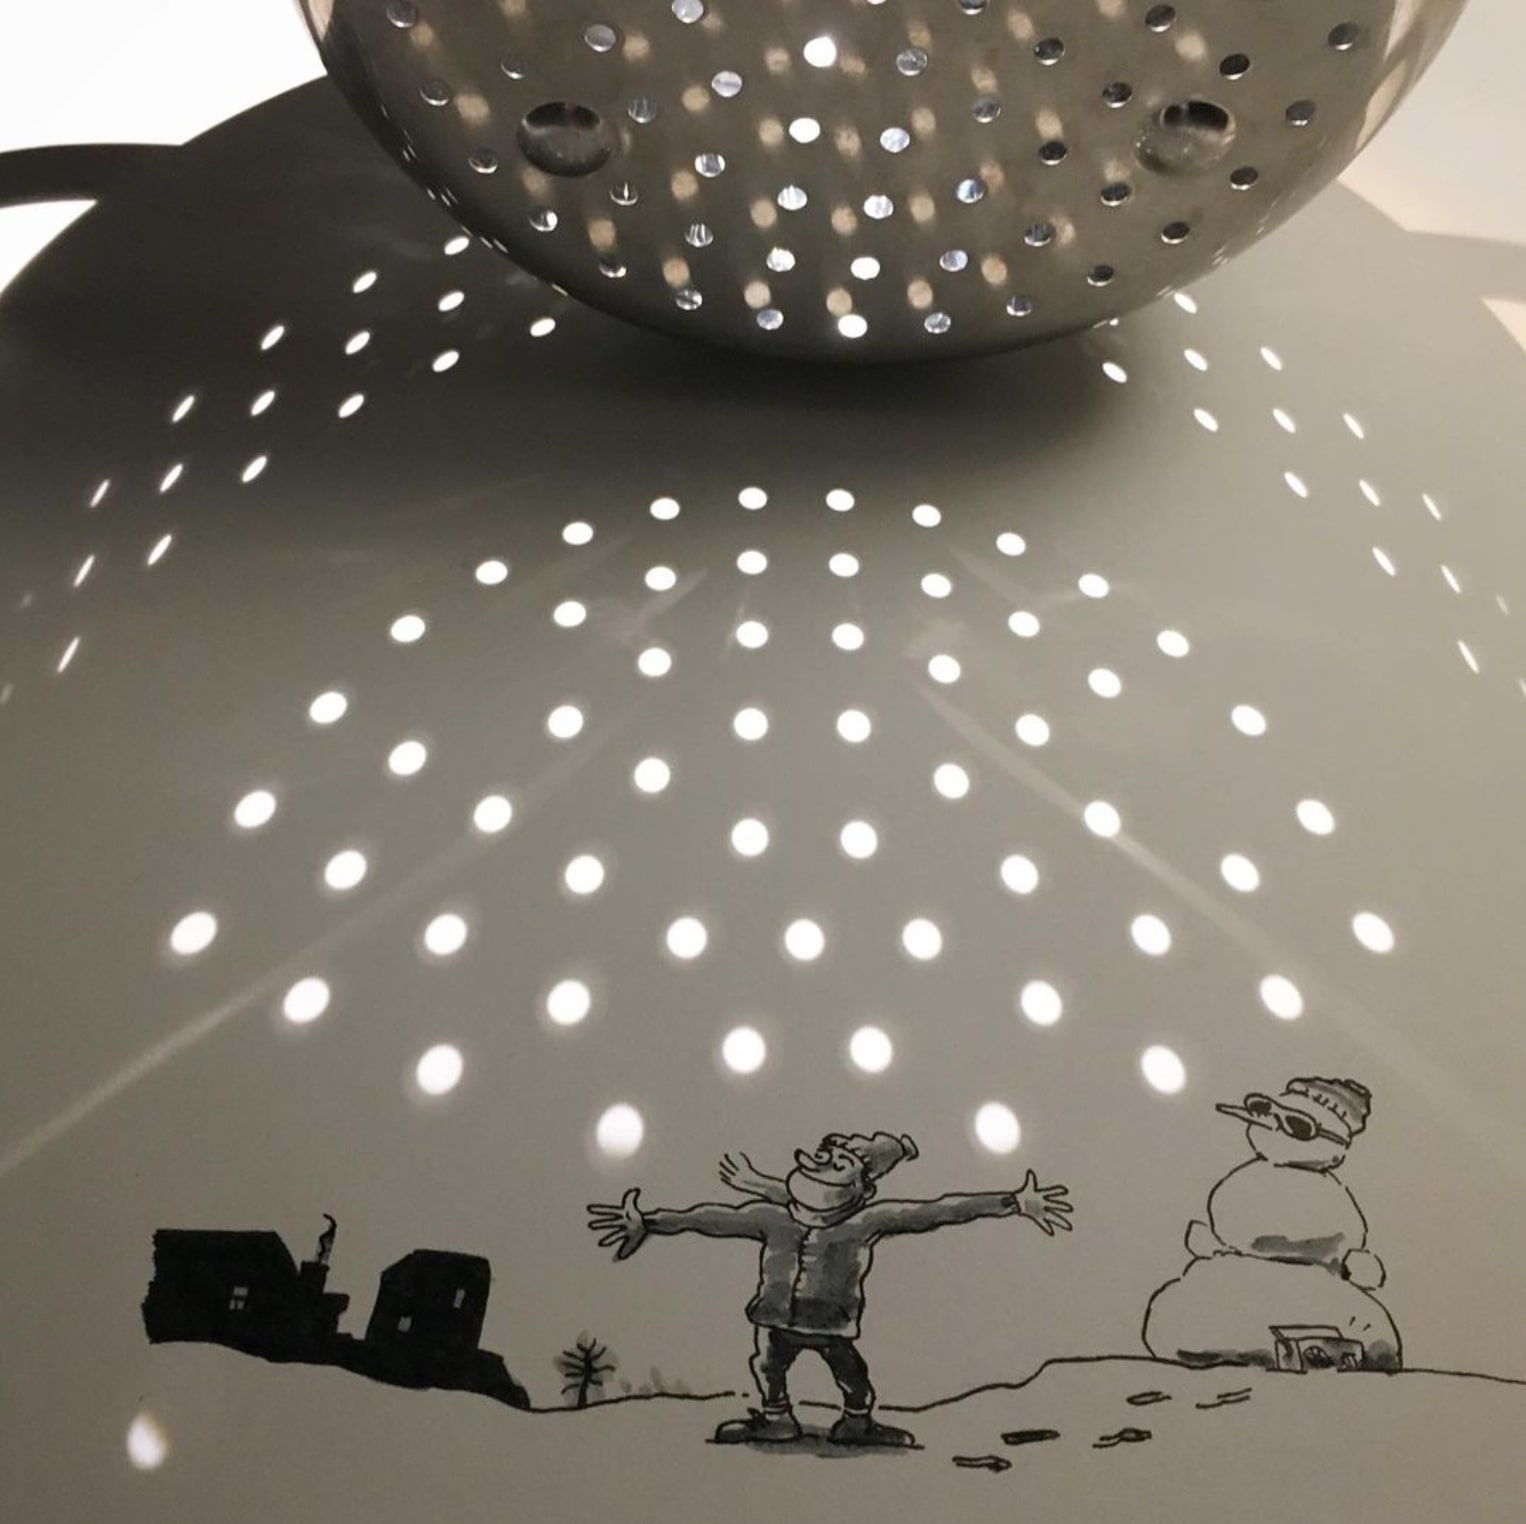 An example of an amusing art piece made with shadows